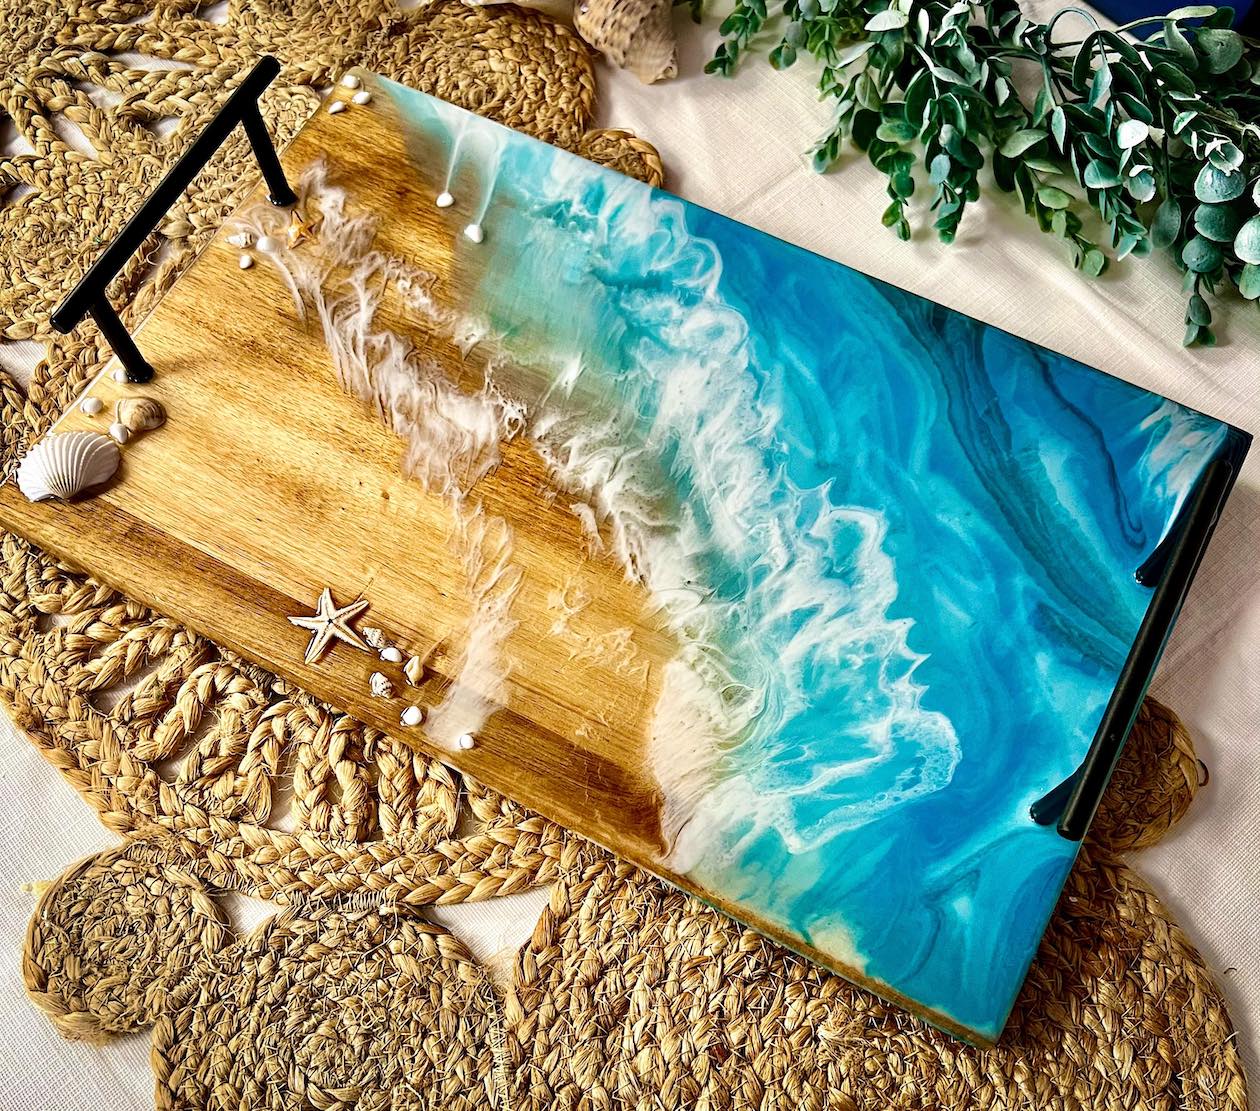 NEW! Resin Poured Ocean Wave Tray